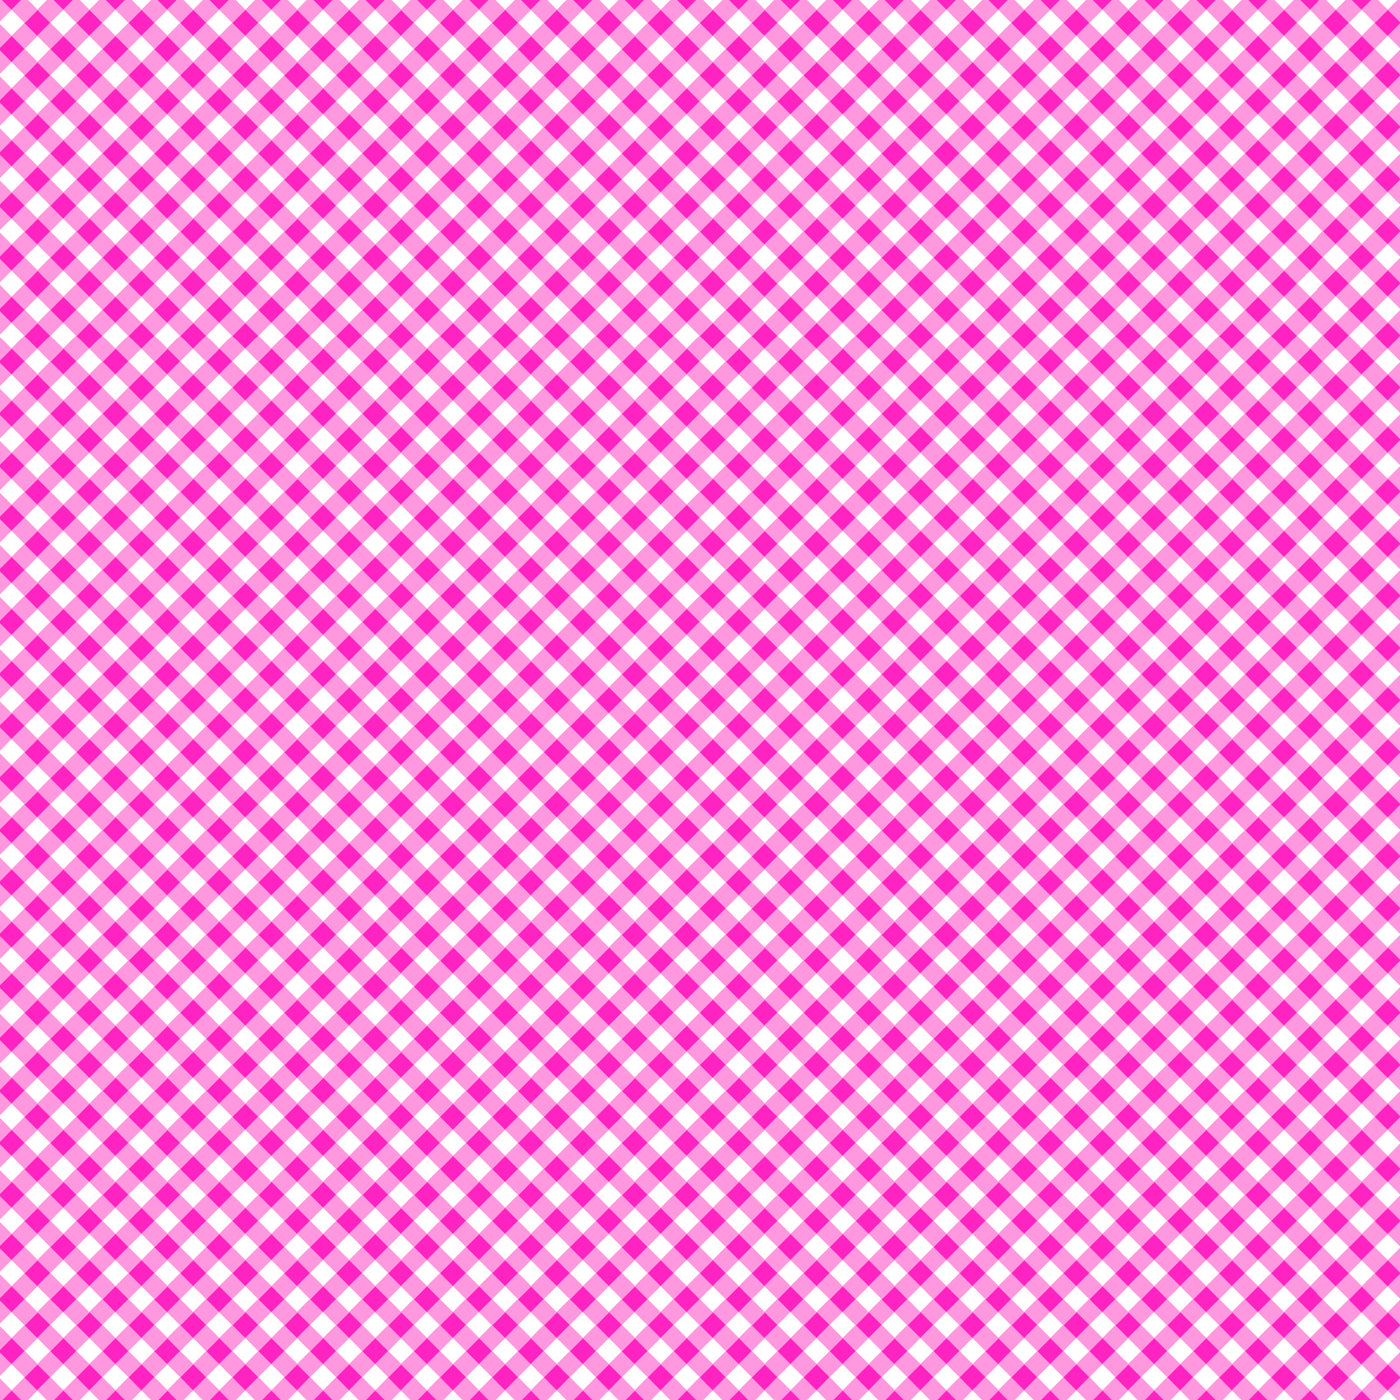 12x12 patterned cardstock with hot pink gingham pattern on white - American Crafts